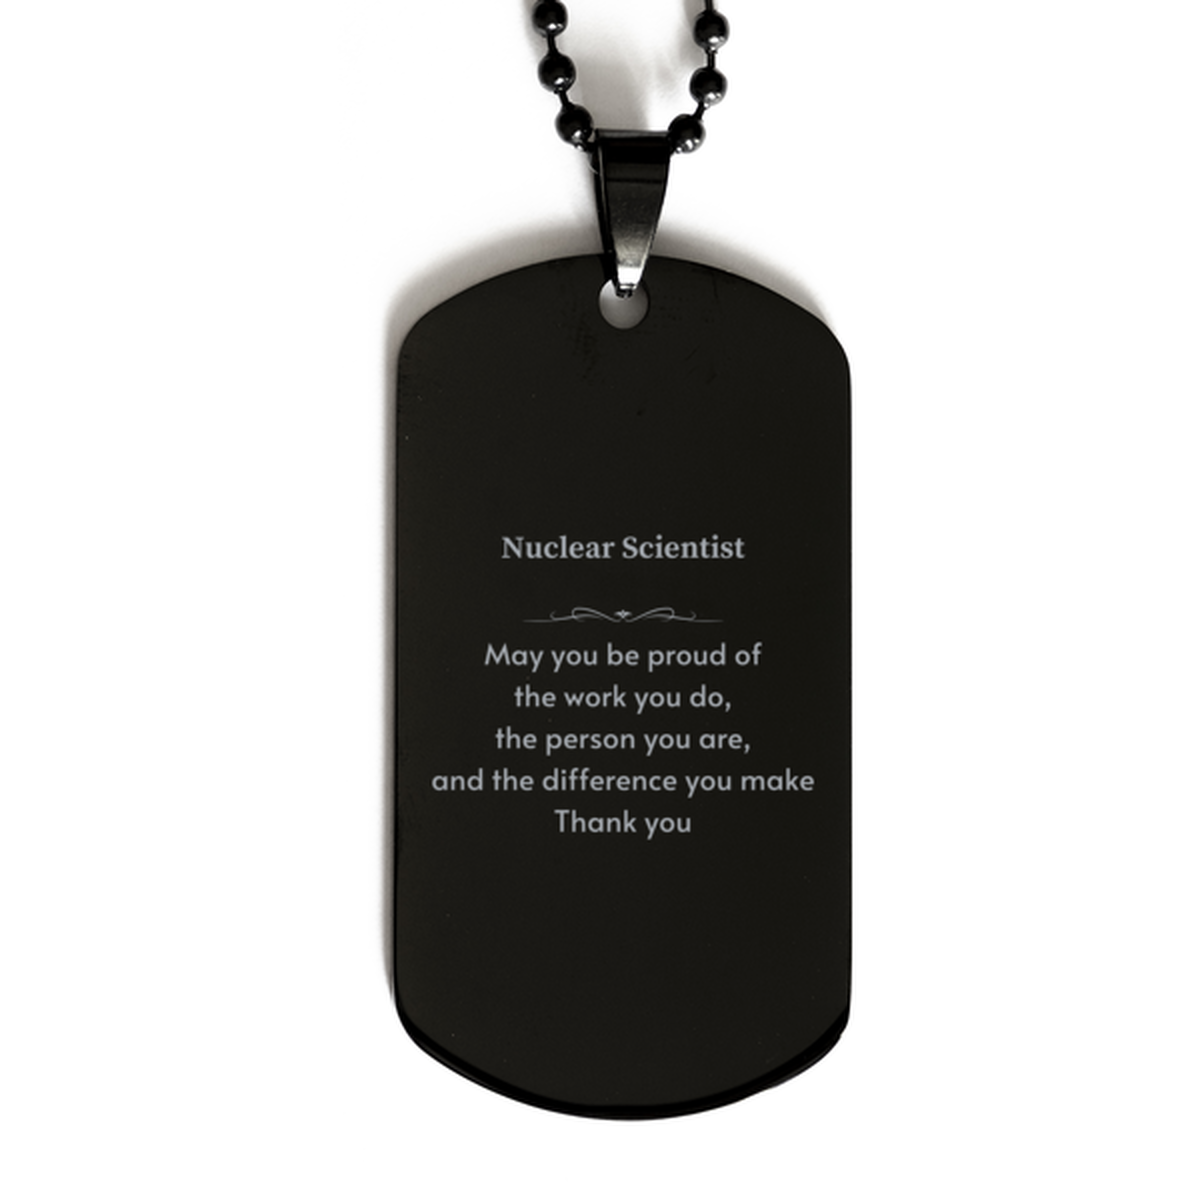 Heartwarming Black Dog Tag Retirement Coworkers Gifts for Nuclear Scientist, Nuclear Scientist May You be proud of the work you do, the person you are Gifts for Boss Men Women Friends